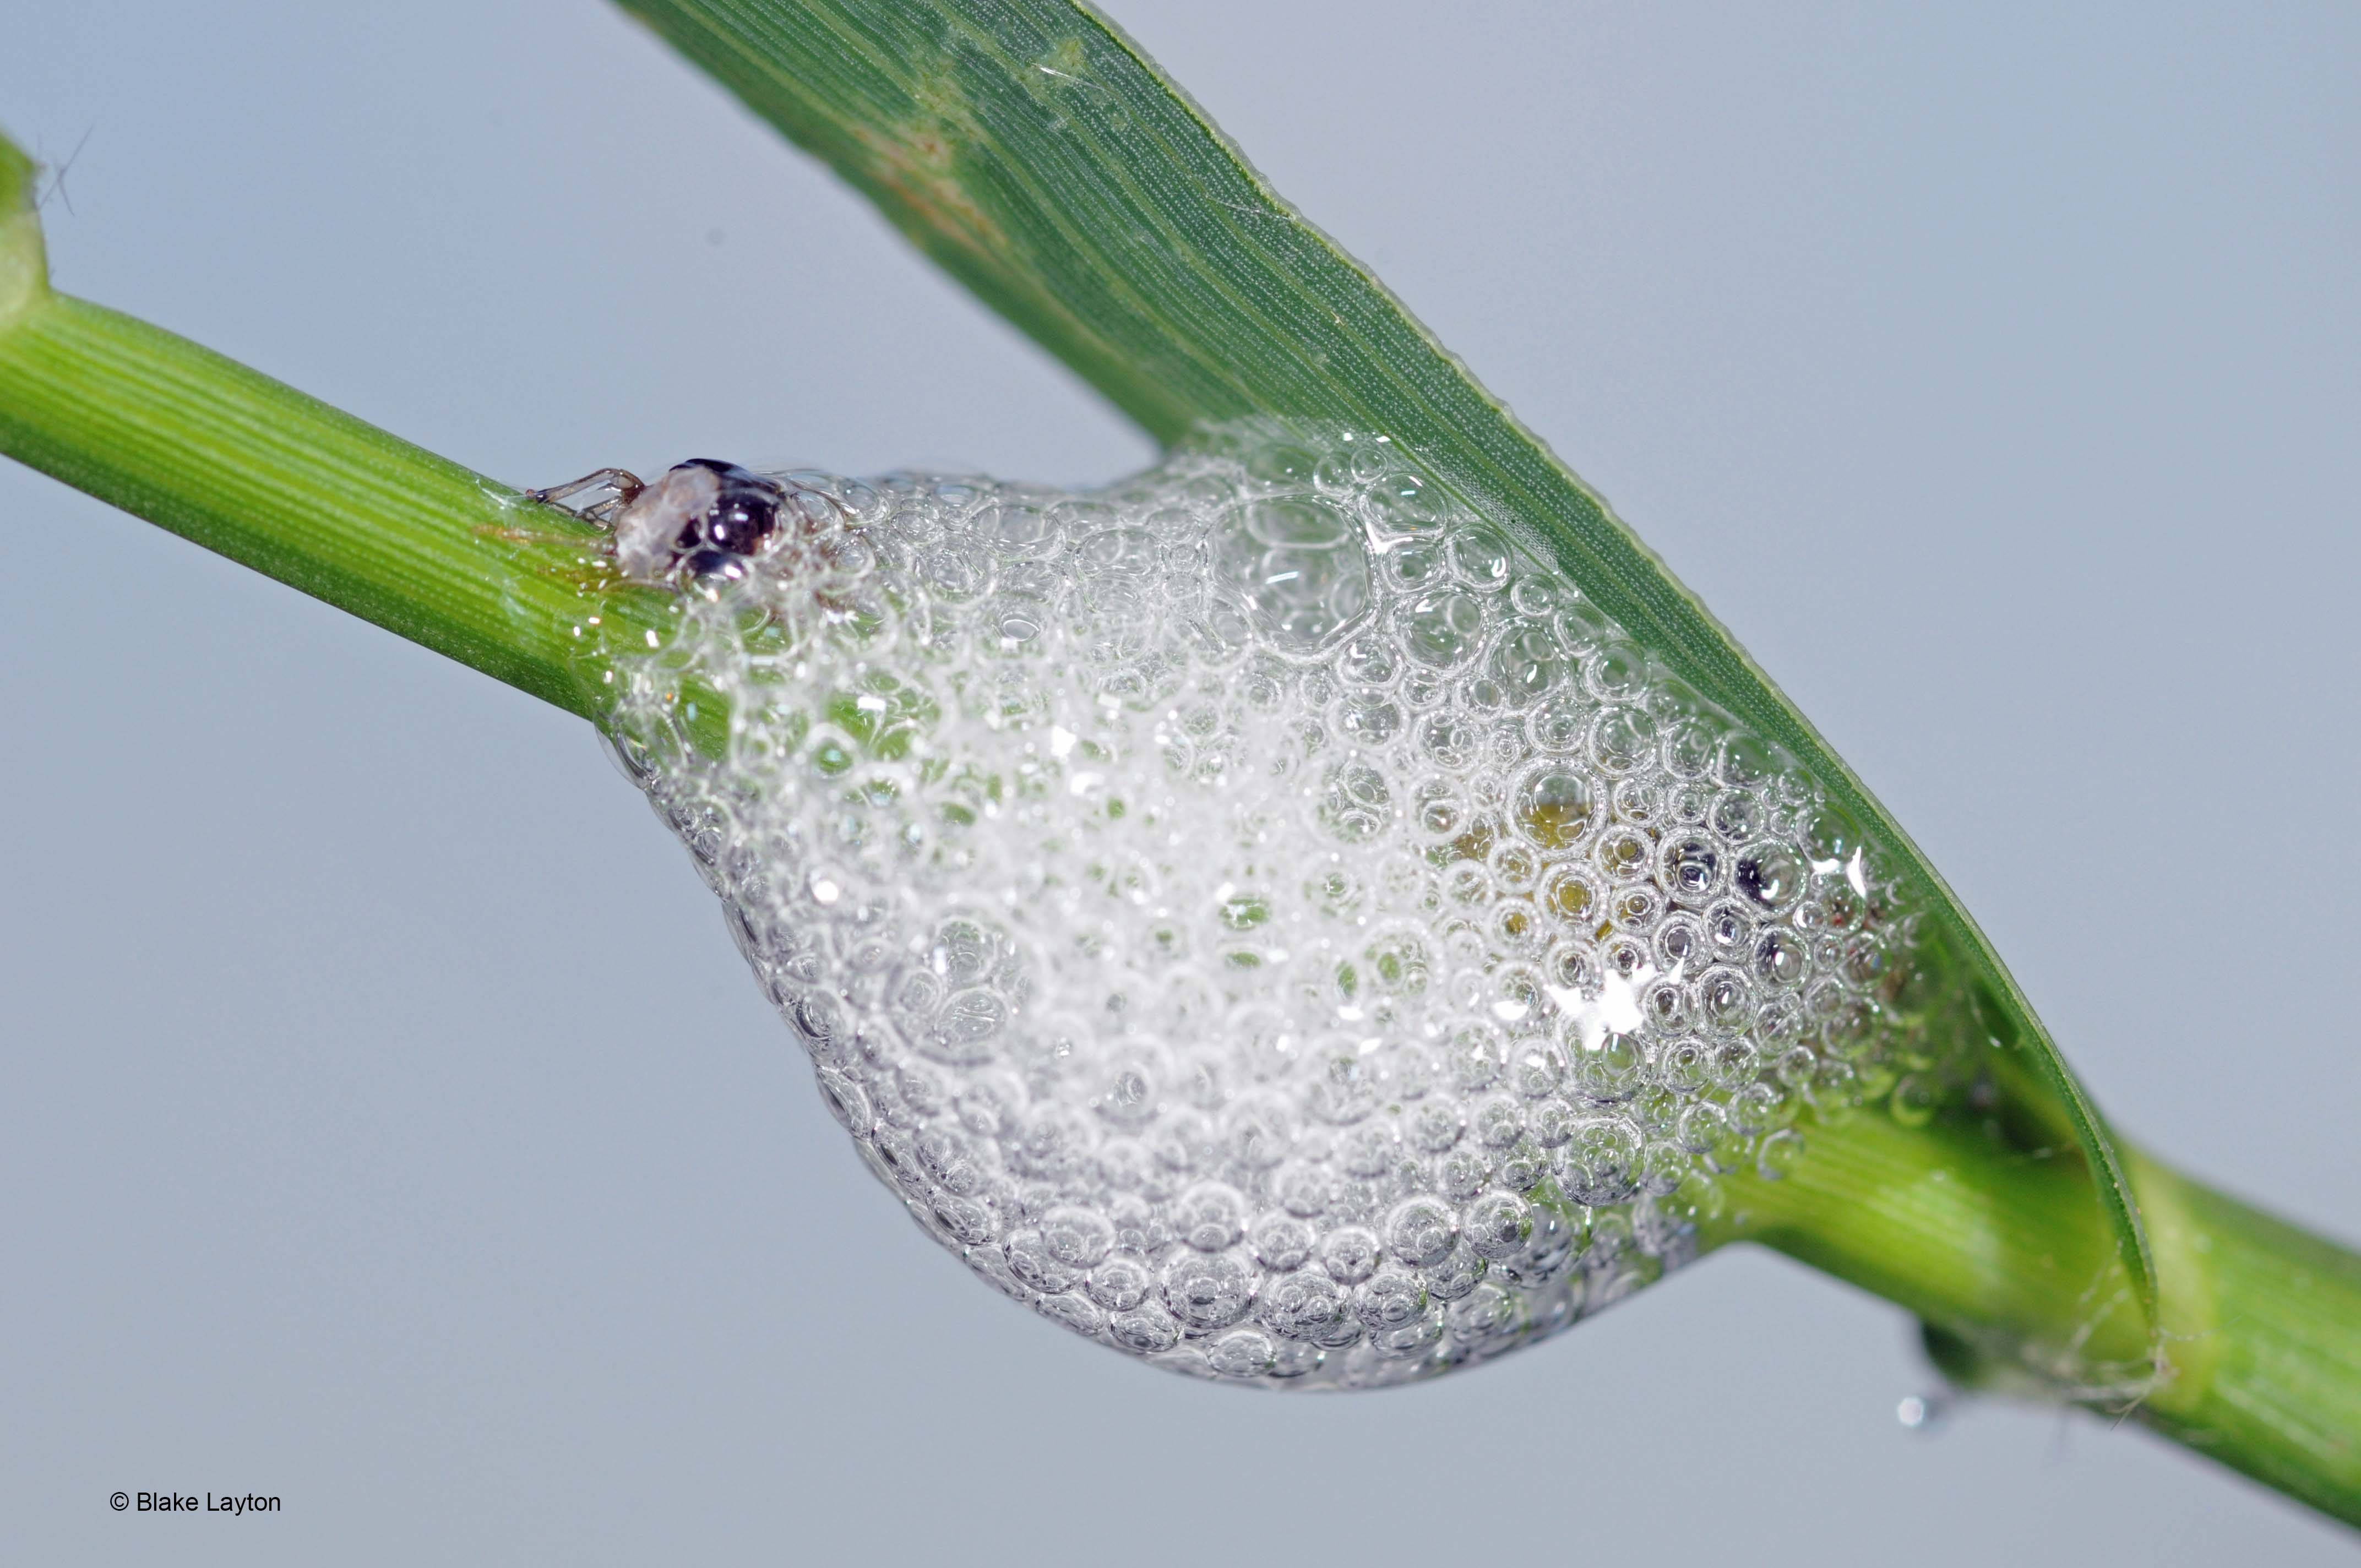 a spittle-like mass of bubbles with an insect inside